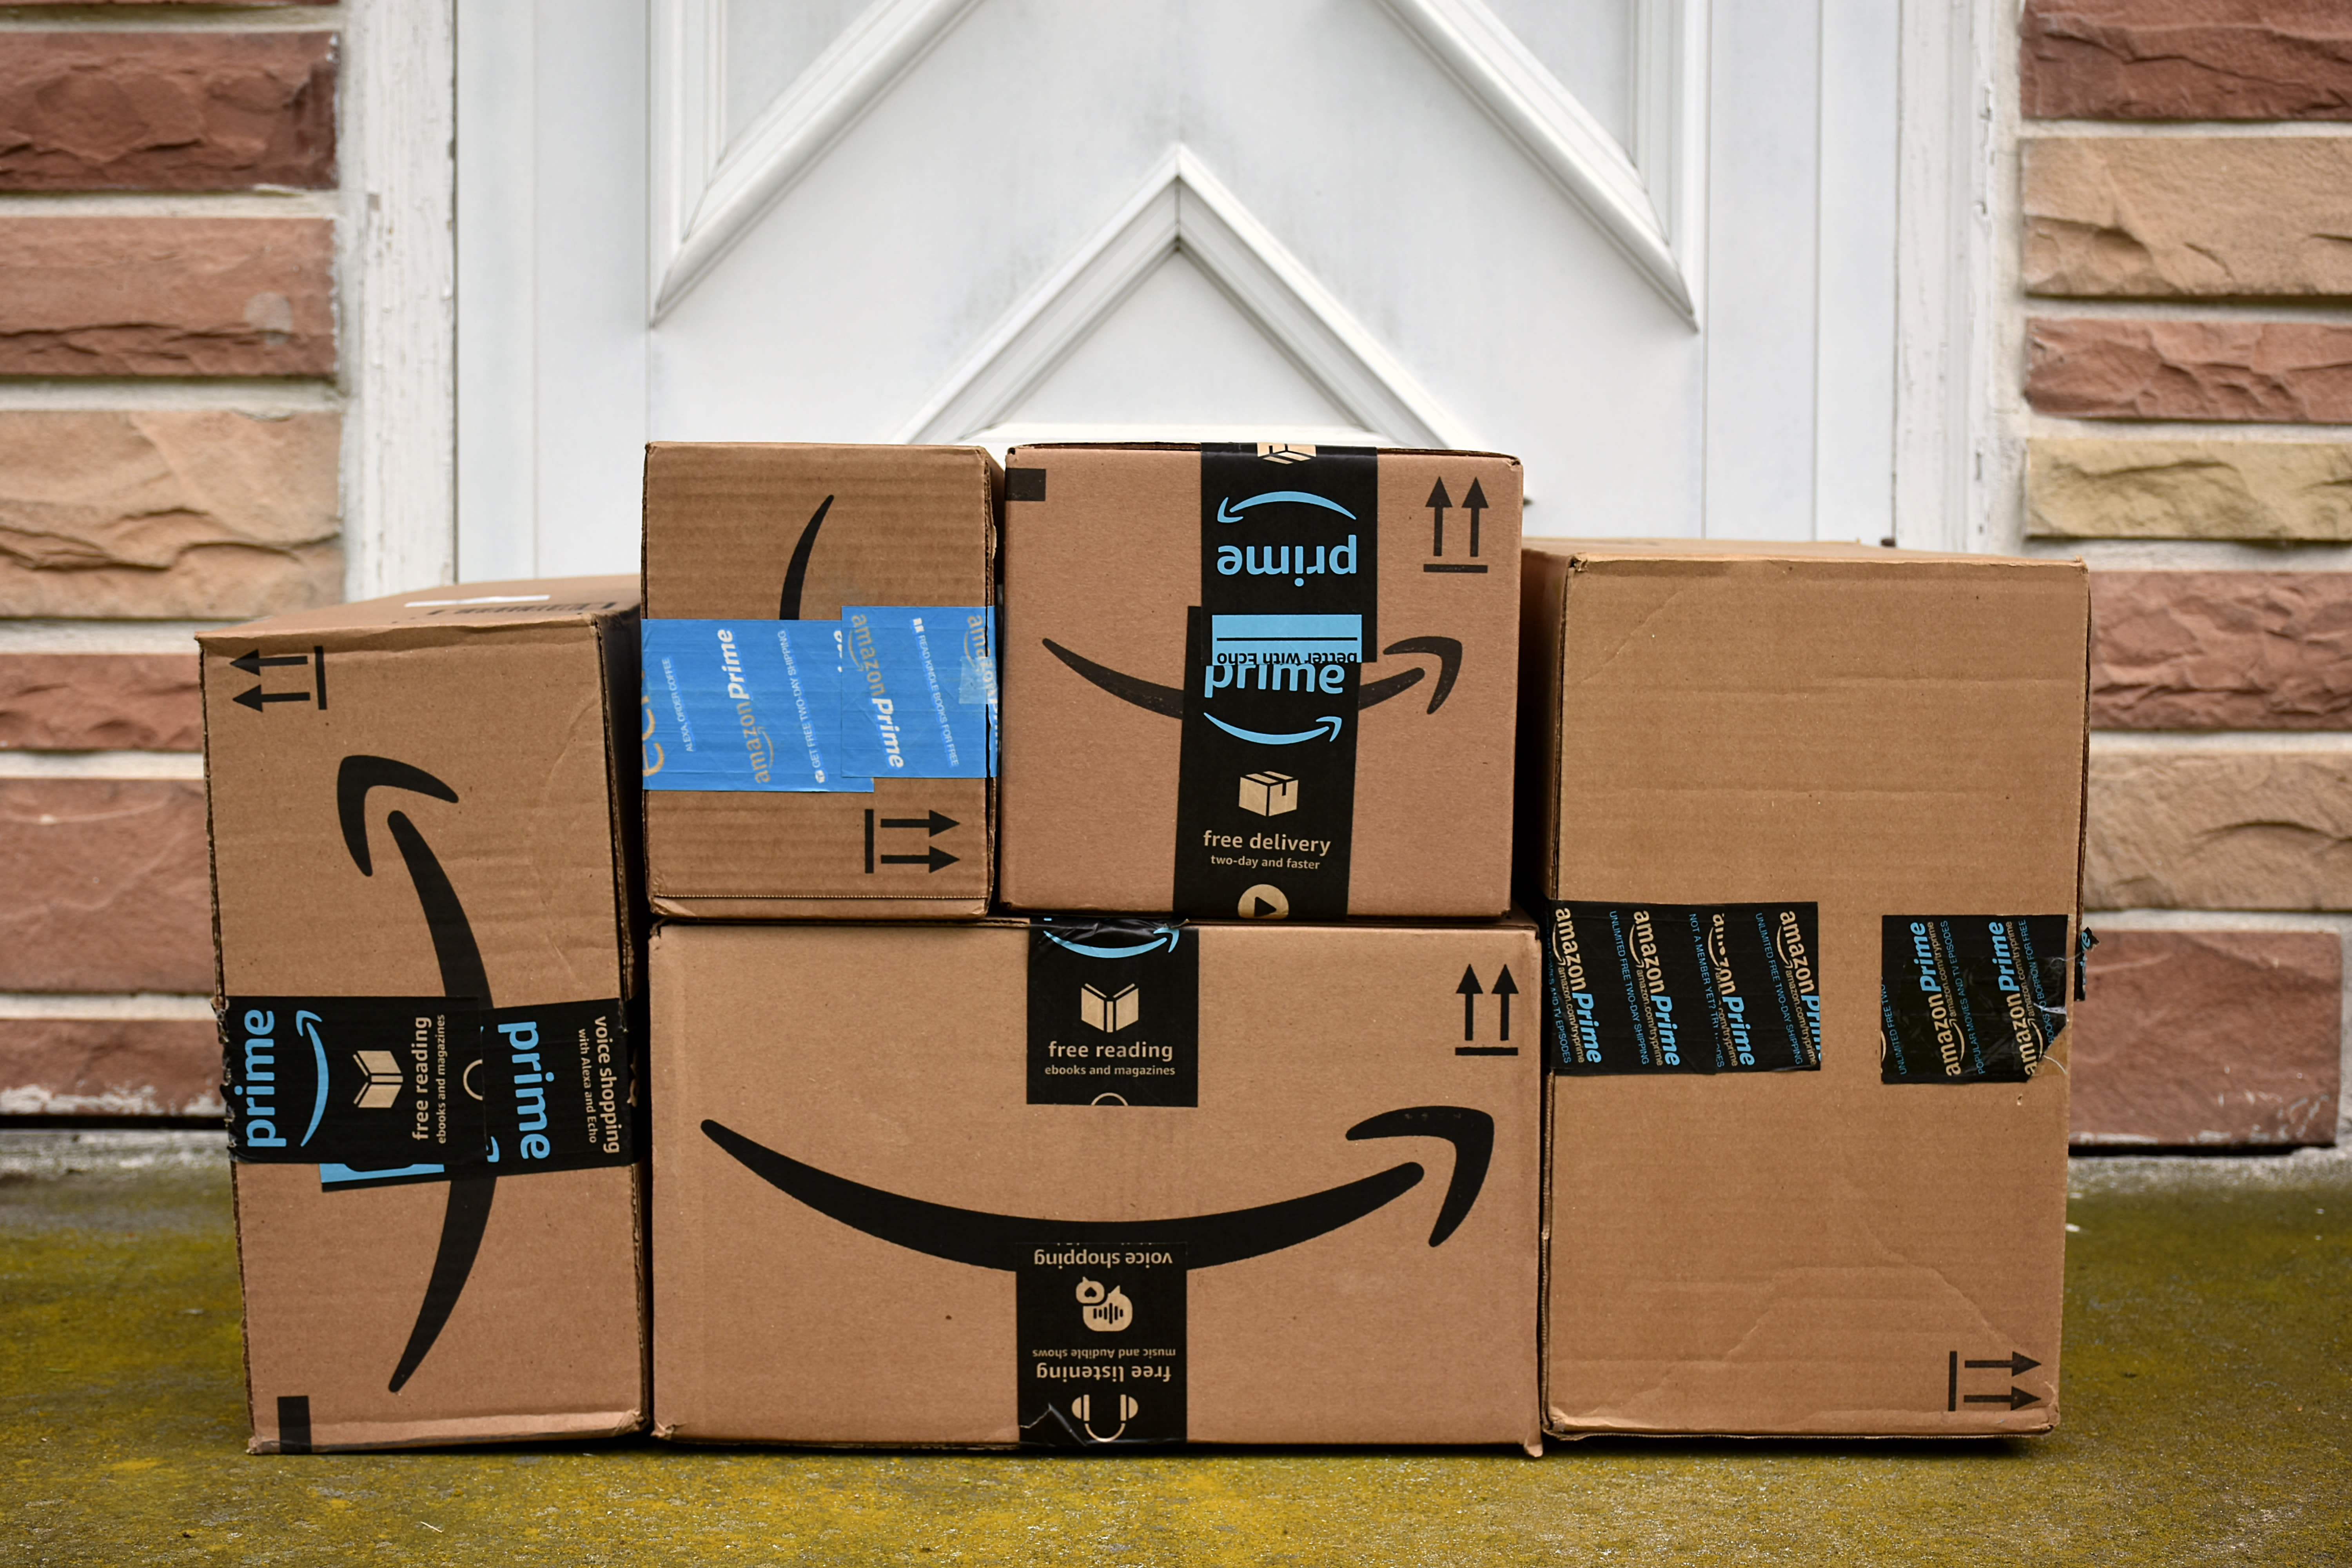 Prime members now get free same-day shipping for holiday